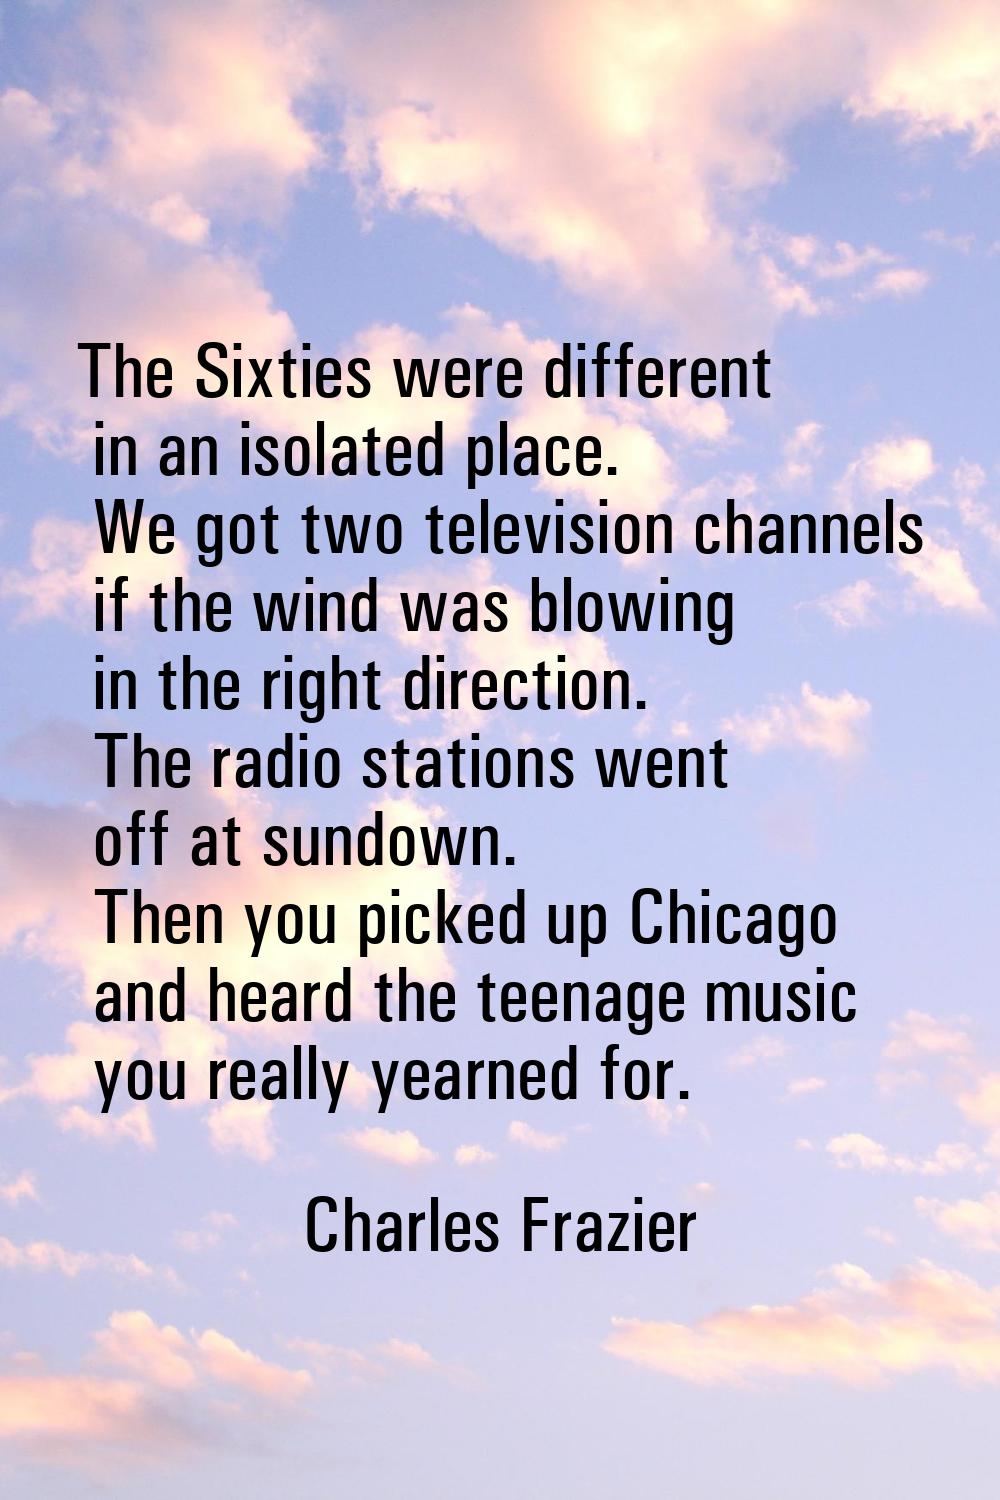 The Sixties were different in an isolated place. We got two television channels if the wind was blo